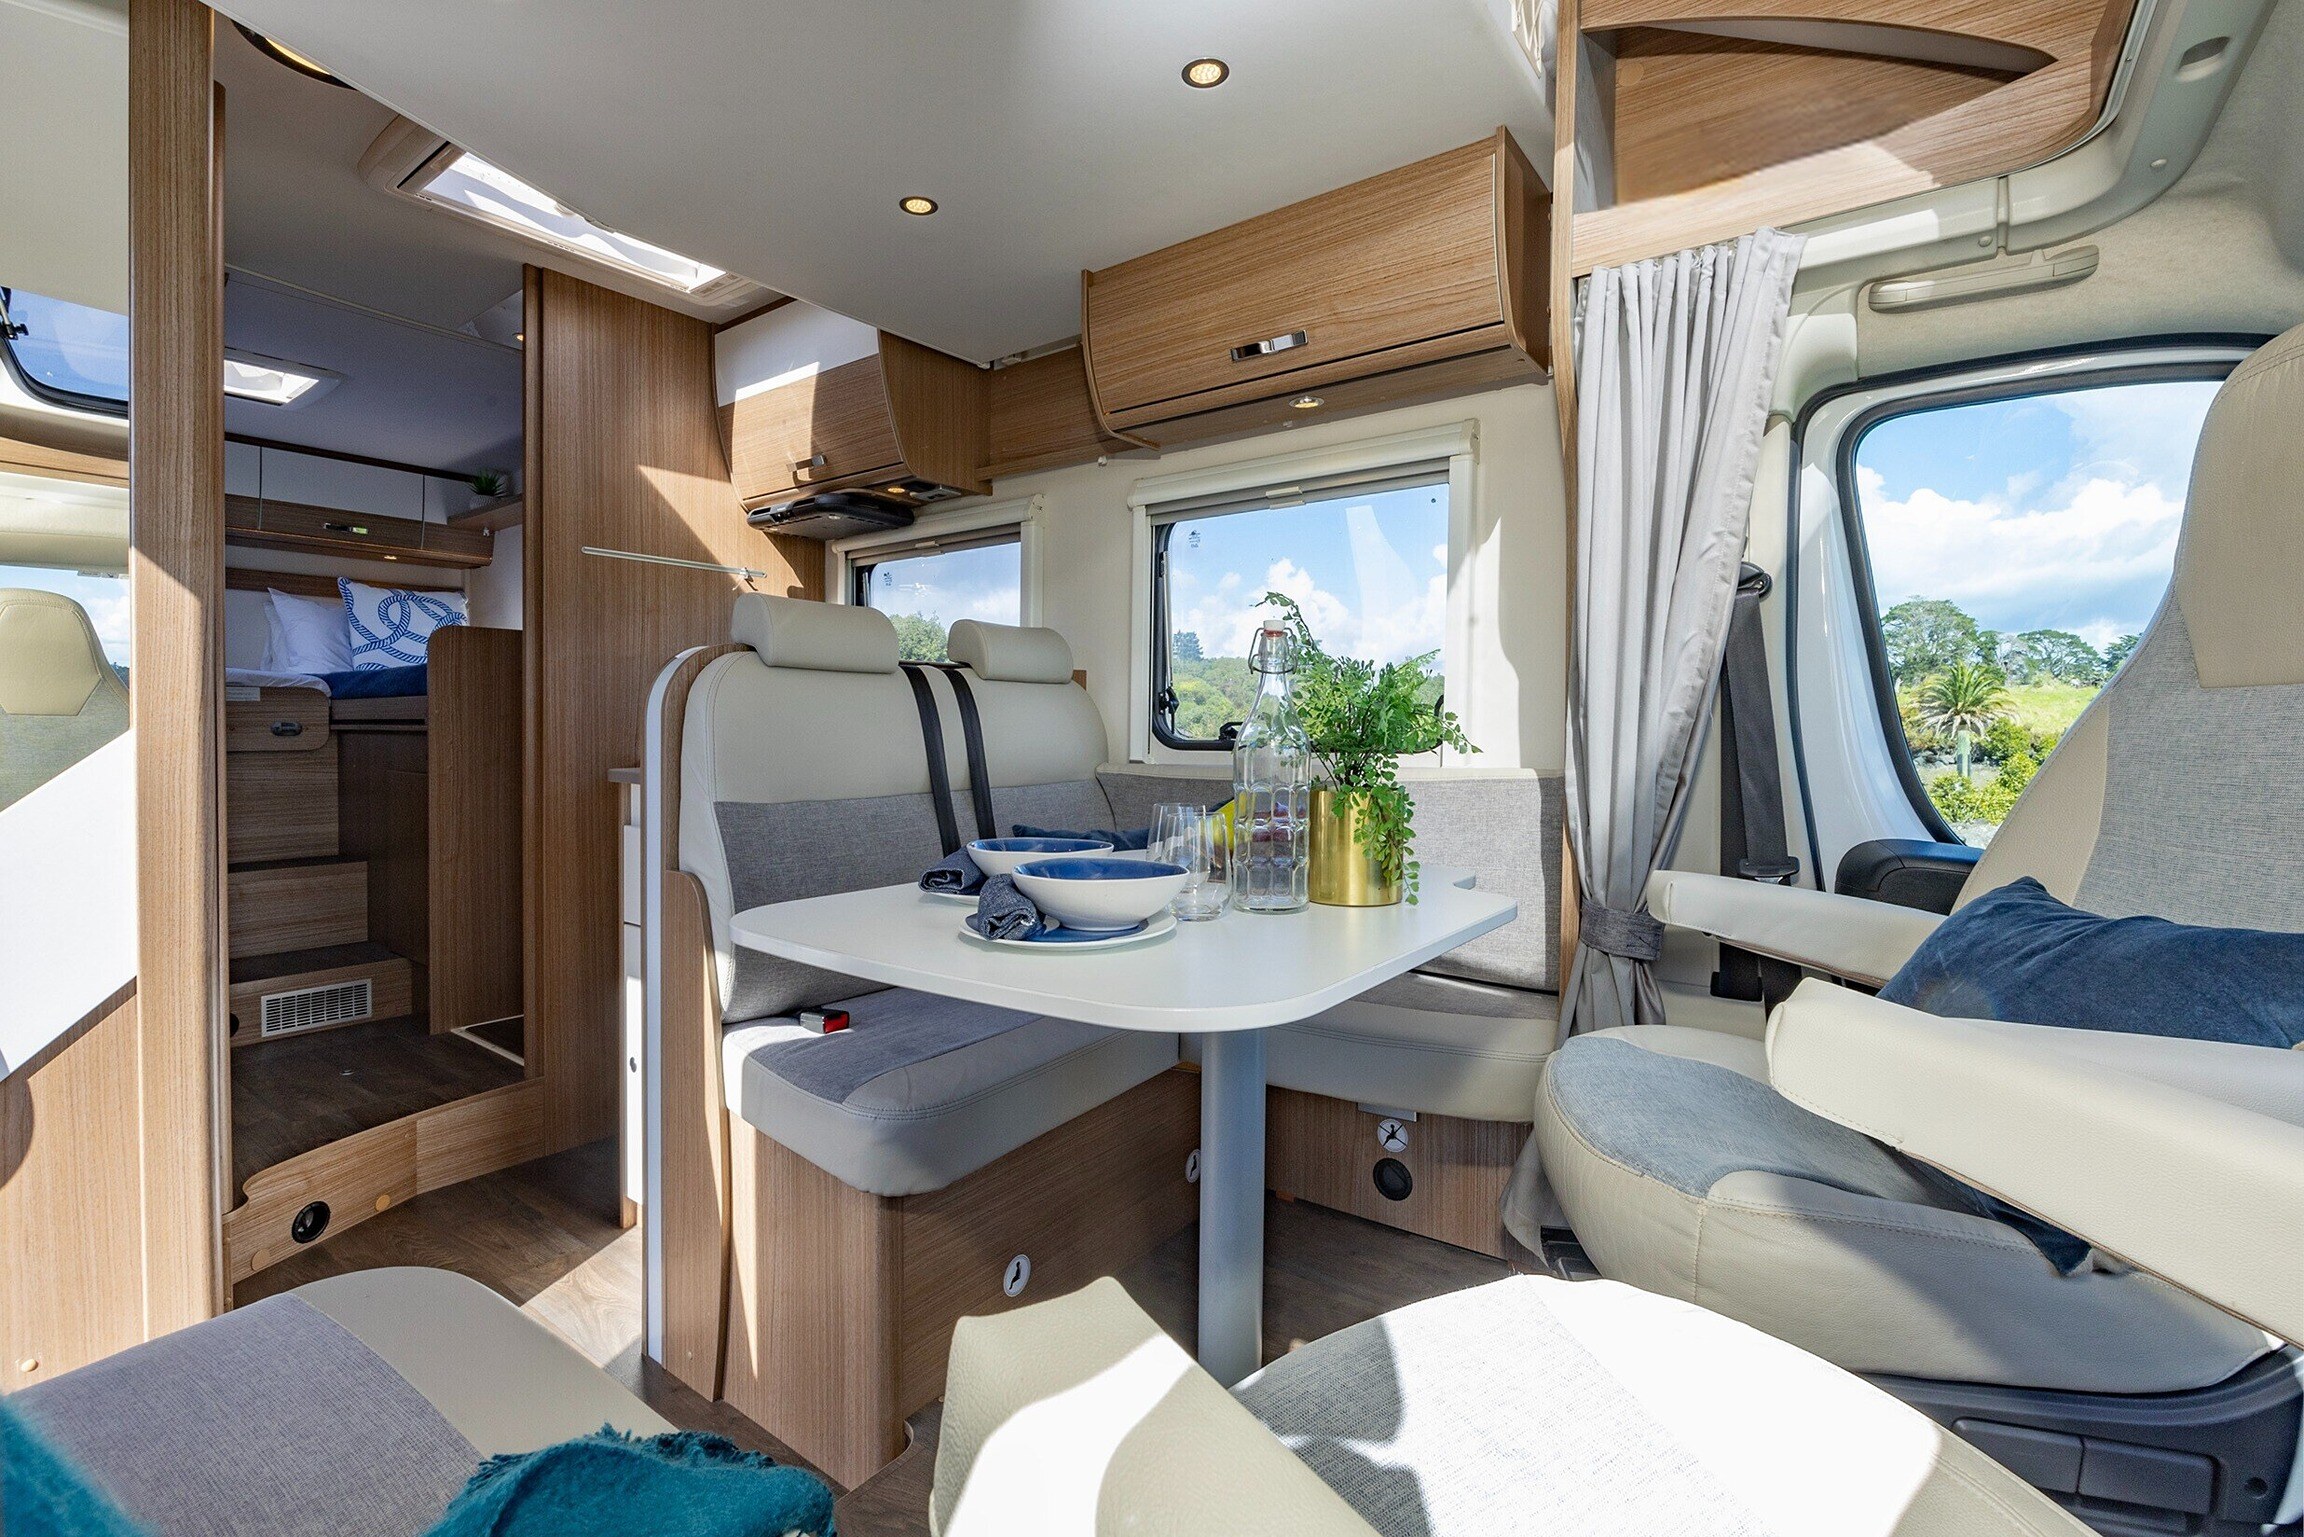 Wilderness 2019 Carado T447 motorhome front angle